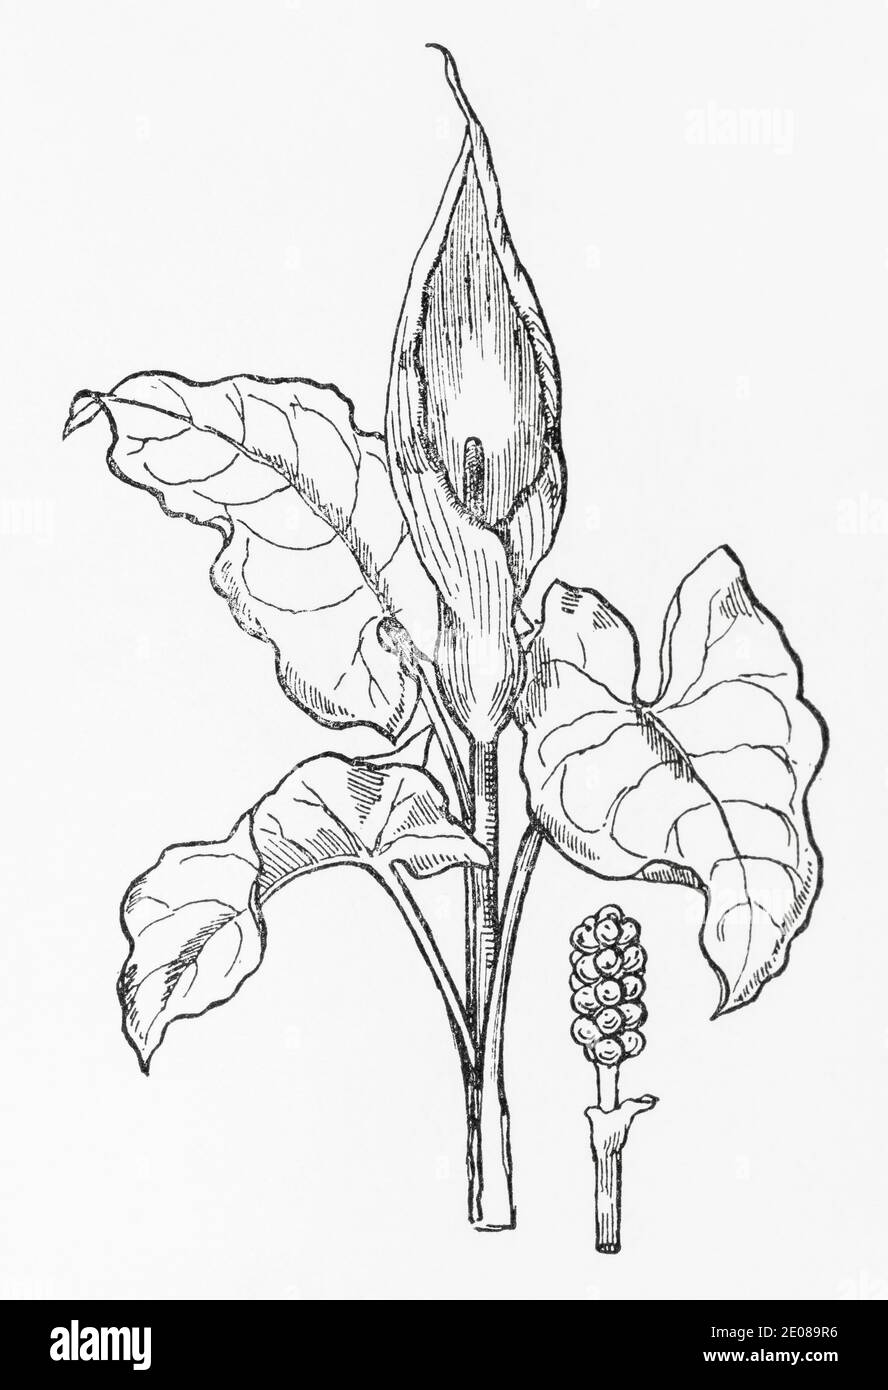 Old botanical illustration engraving of the poisonous Cuckoopint, Lords and Ladies / Arum maculatum. Traditional medicinal herbal plant. See Notes Stock Photo